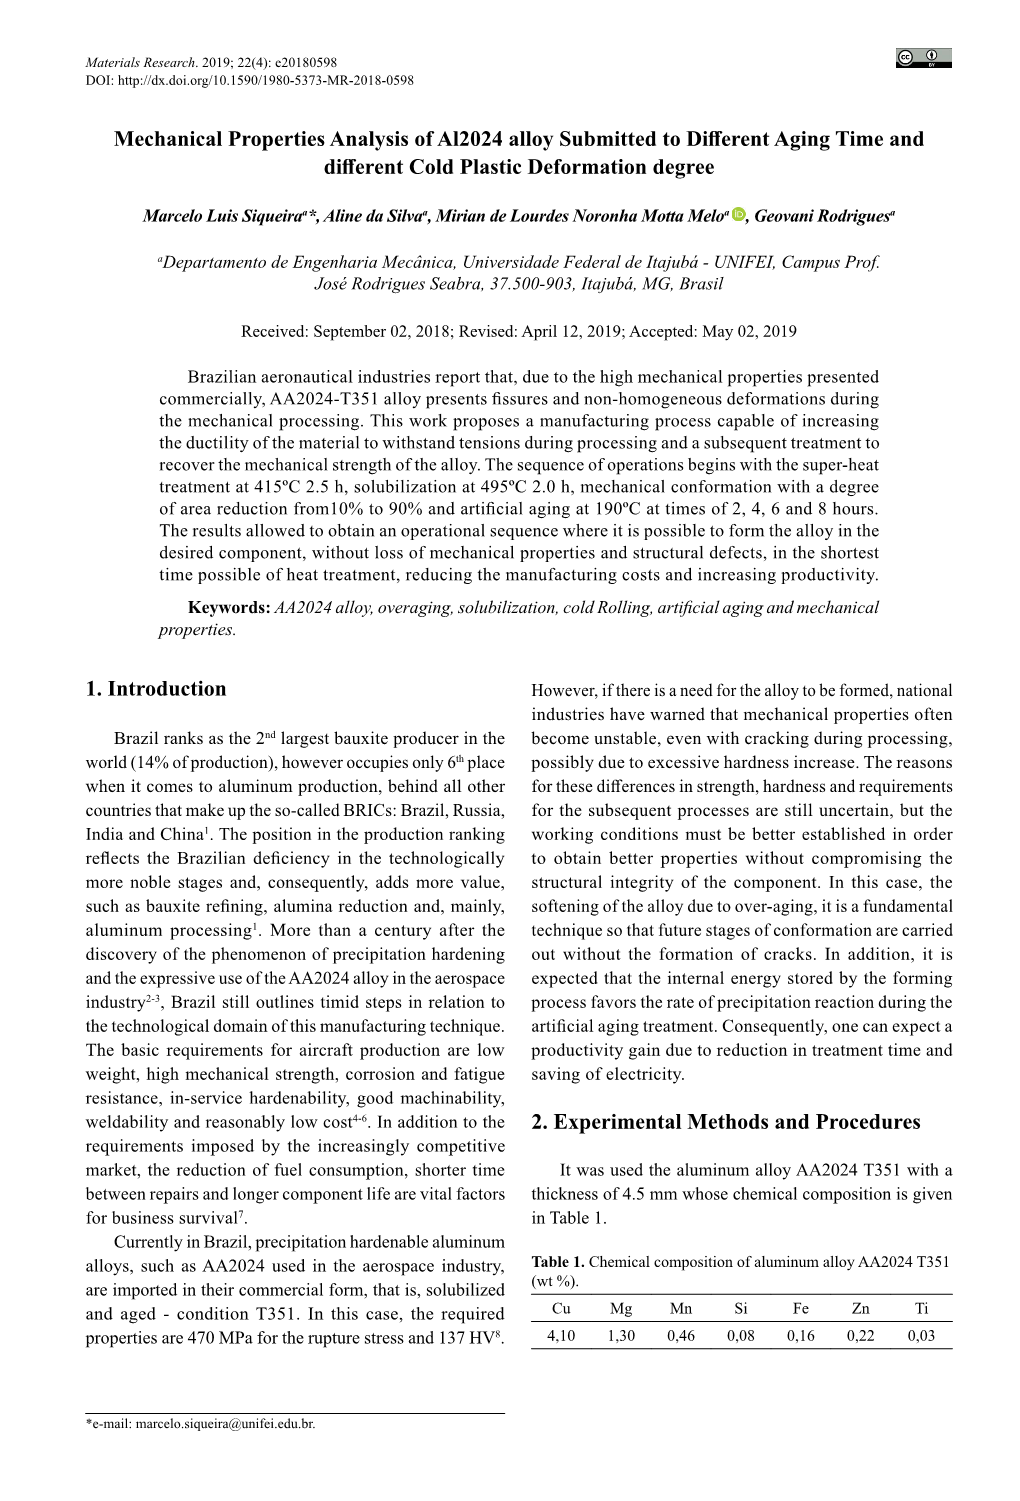 Mechanical Properties Analysis of Al2024 Alloy Submitted to Different Aging Time and Different Cold Plastic Deformation Degree